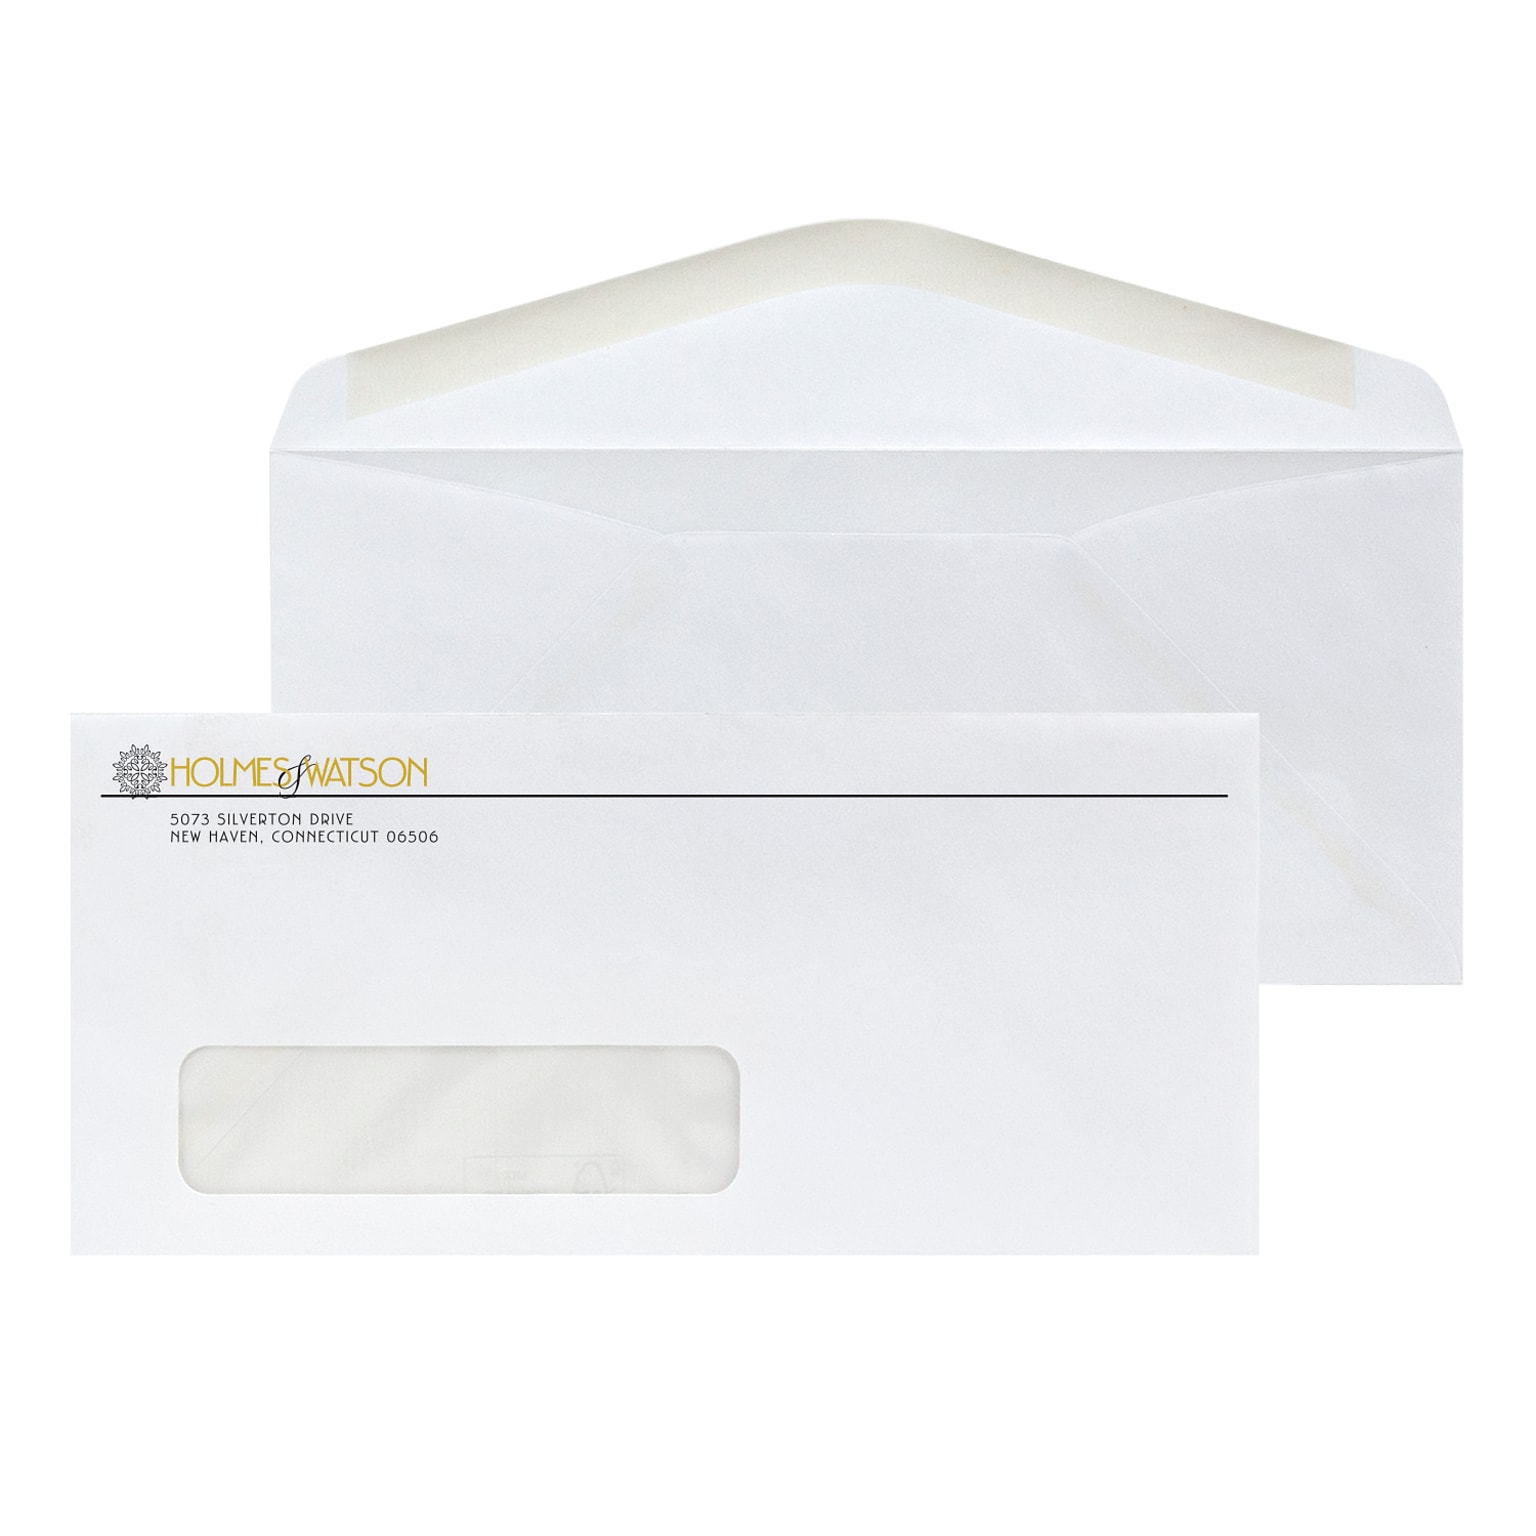 Custom #10 Window Envelopes, 4 1/8x9 1/2, Recycled 24# White Wove with EarthFirst/SFI Logo, 1 Std and 1 Custom Inks, 250/Pack